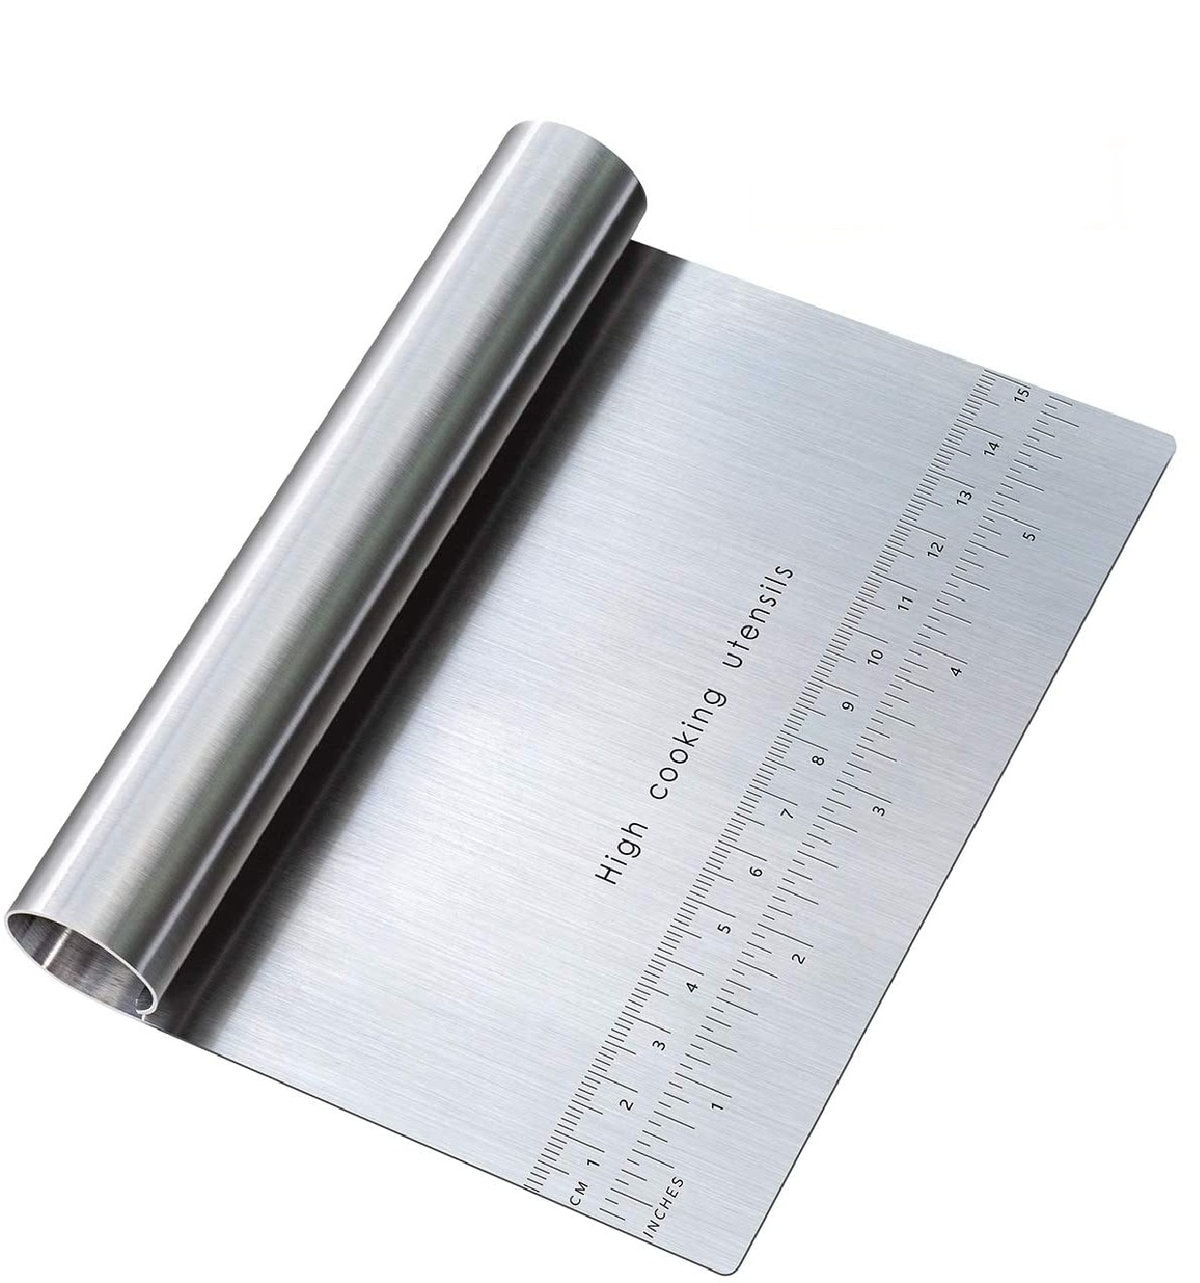 A stainless steel pastry cutter/scraper.